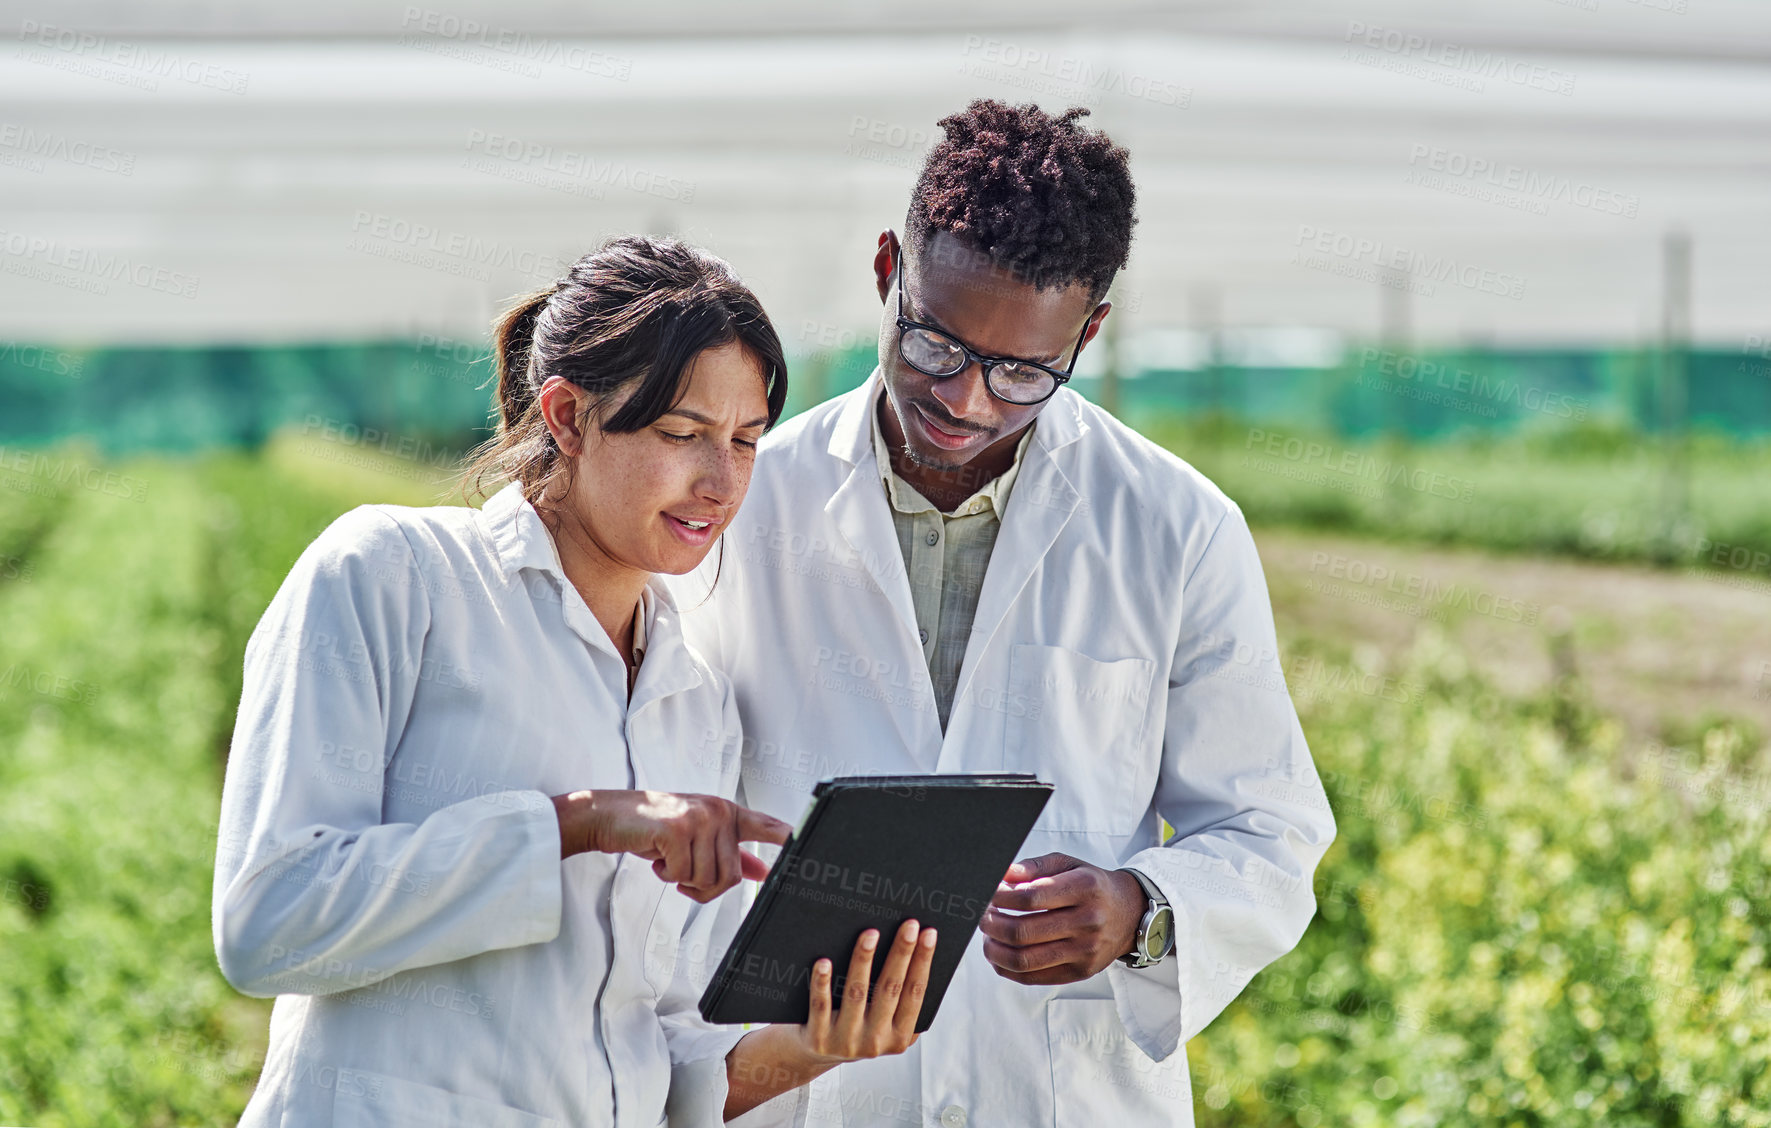 Buy stock photo Shot of two young scientists using a digital tablet wile studying crops and plants outdoors on a farm